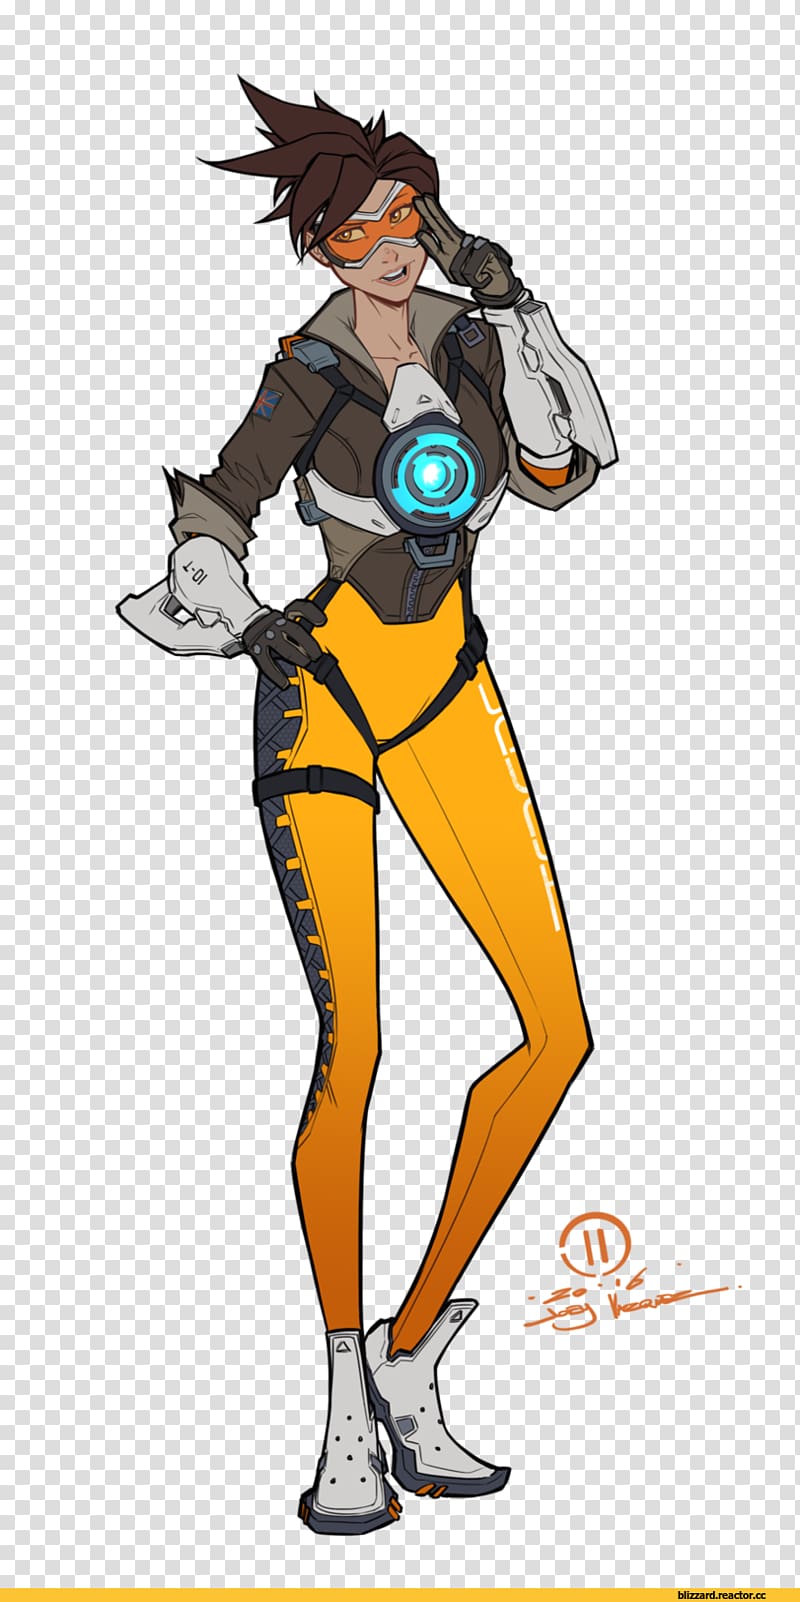 The Art of Overwatch Limited Edition Tracer, painting transparent background PNG clipart